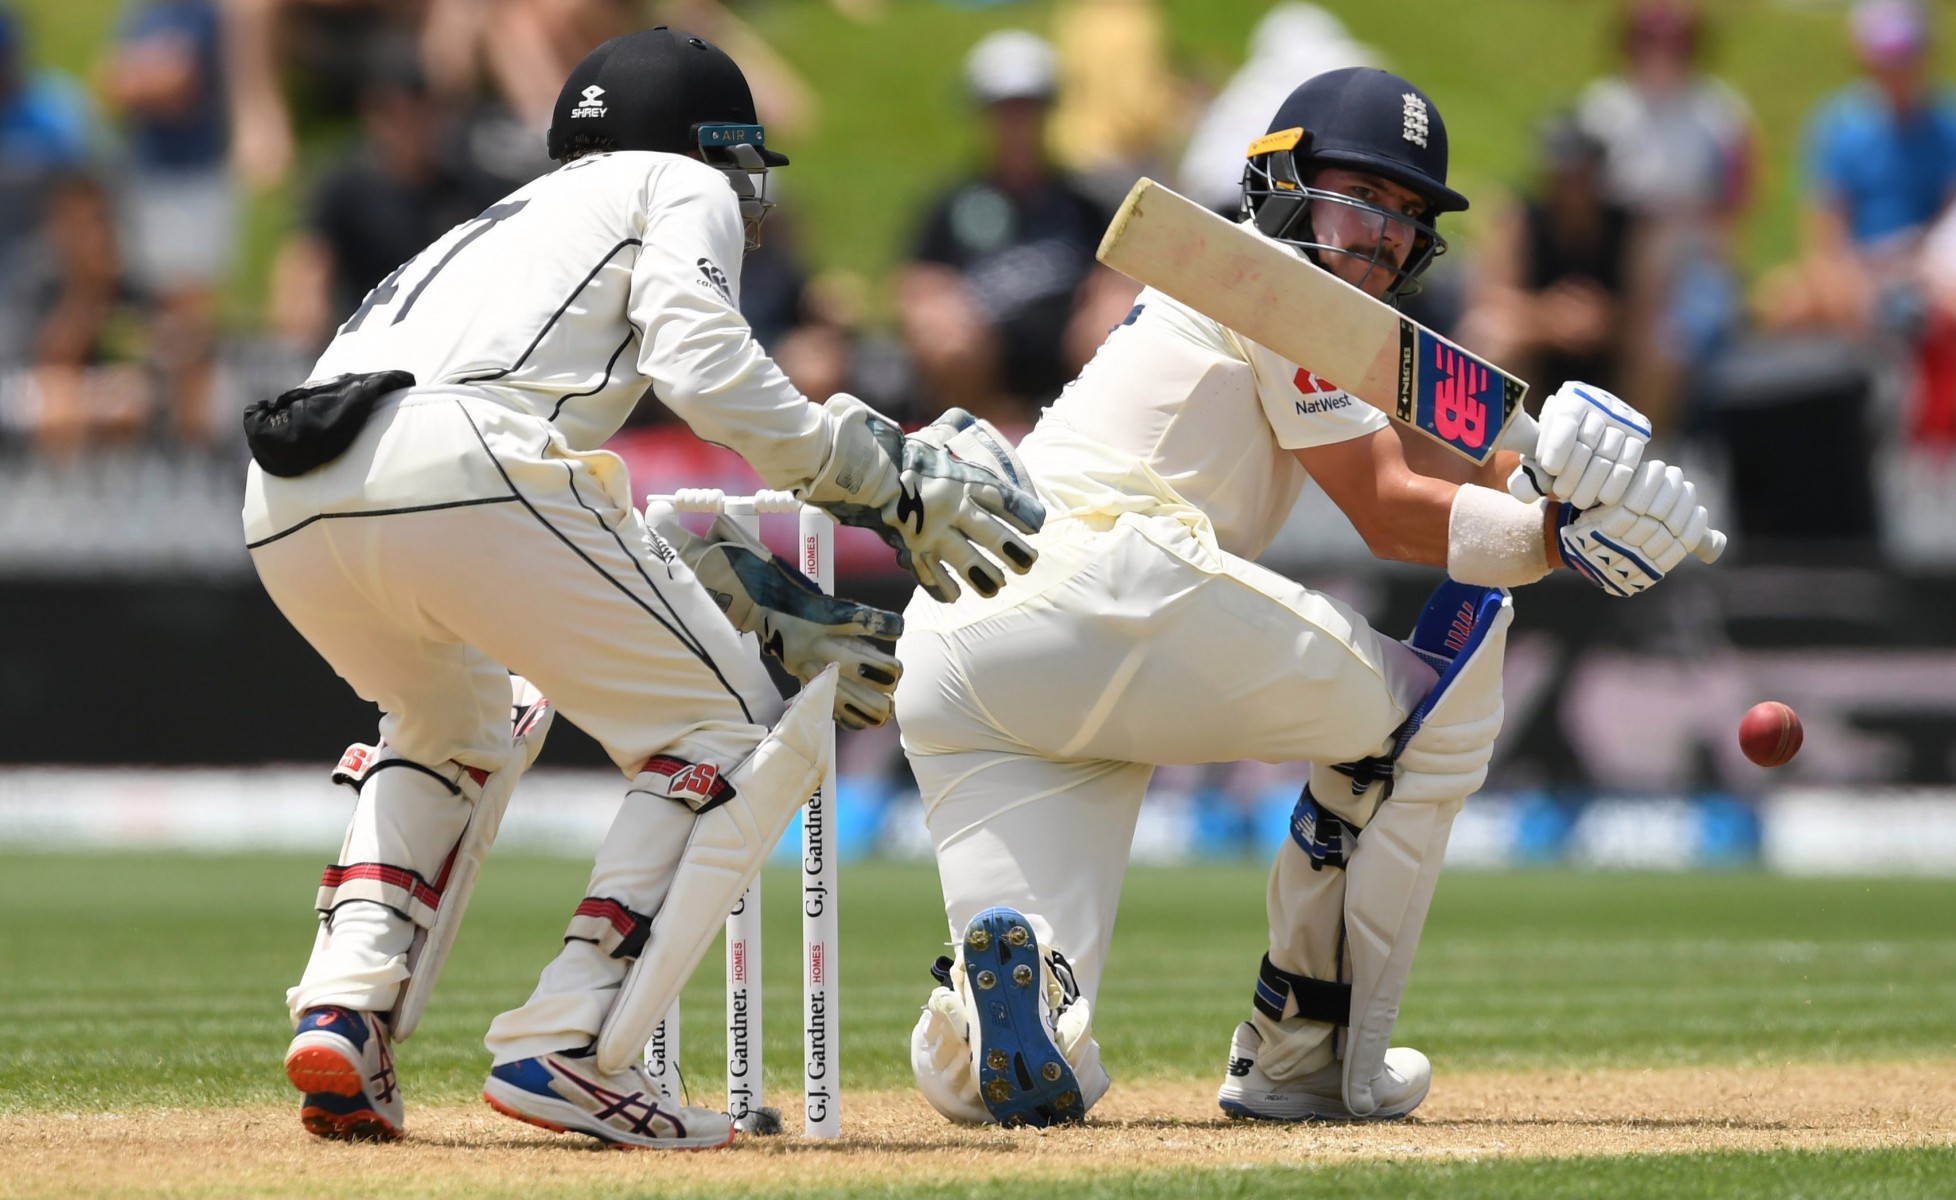 Opening batsman Rory Burns was one of the few bright spots as England lost their two-Test series in New Zealand 1-0